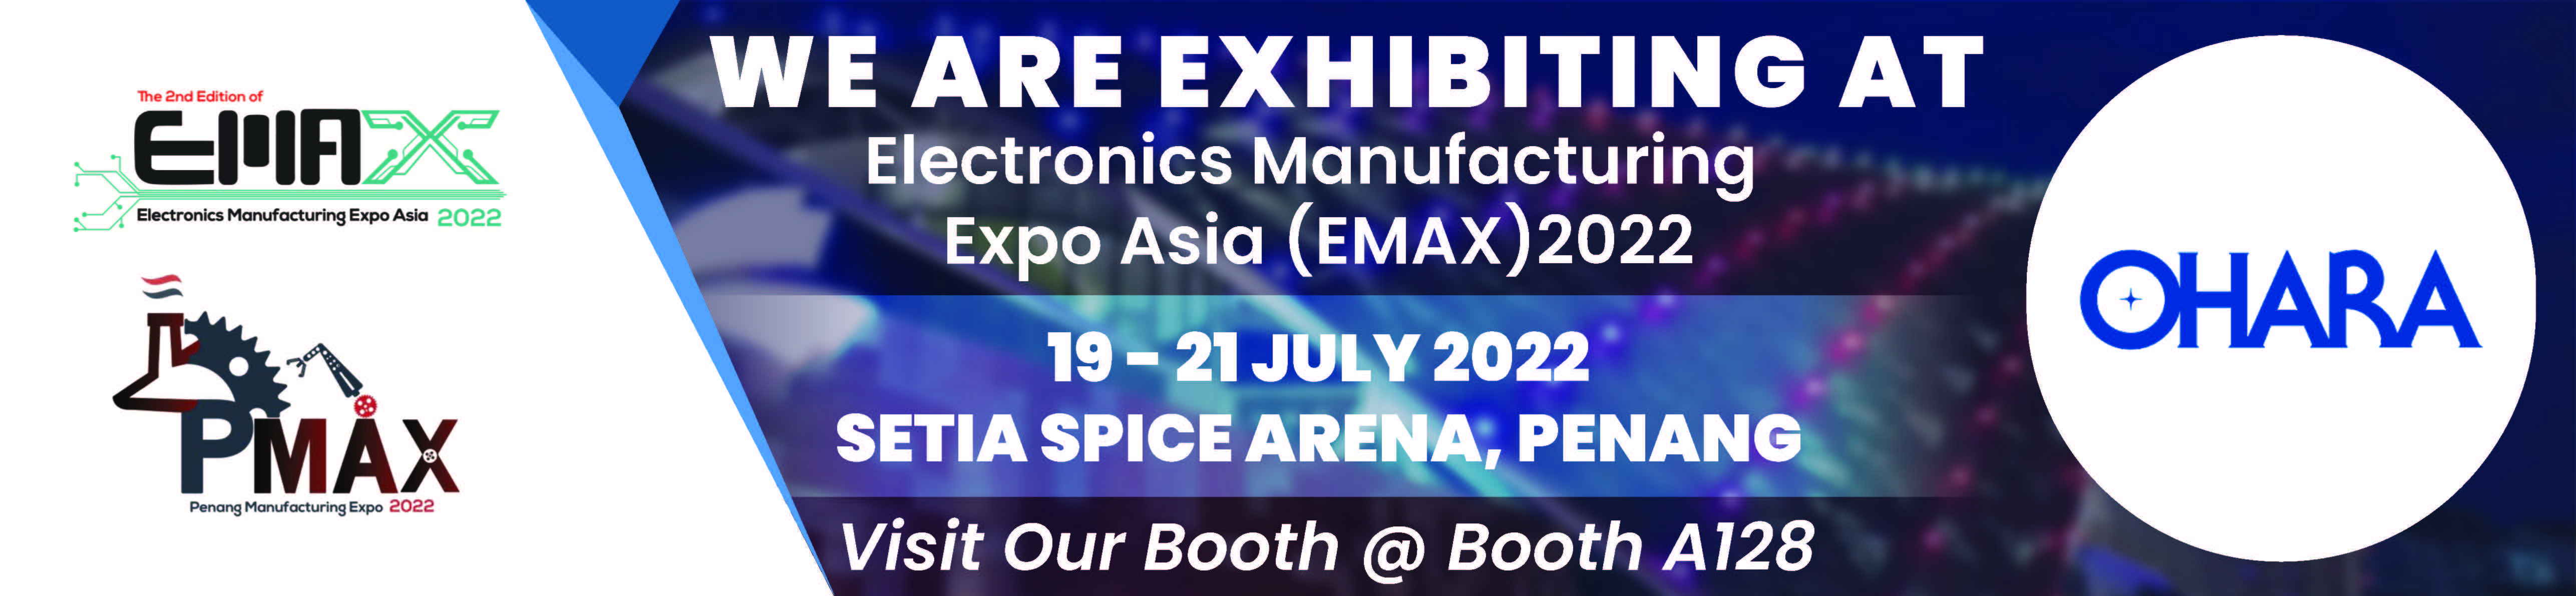 Electronics Manufacturing Expo Asia (EMAX) Penang Exhibition On 19 July 2022 to 21 July 2022